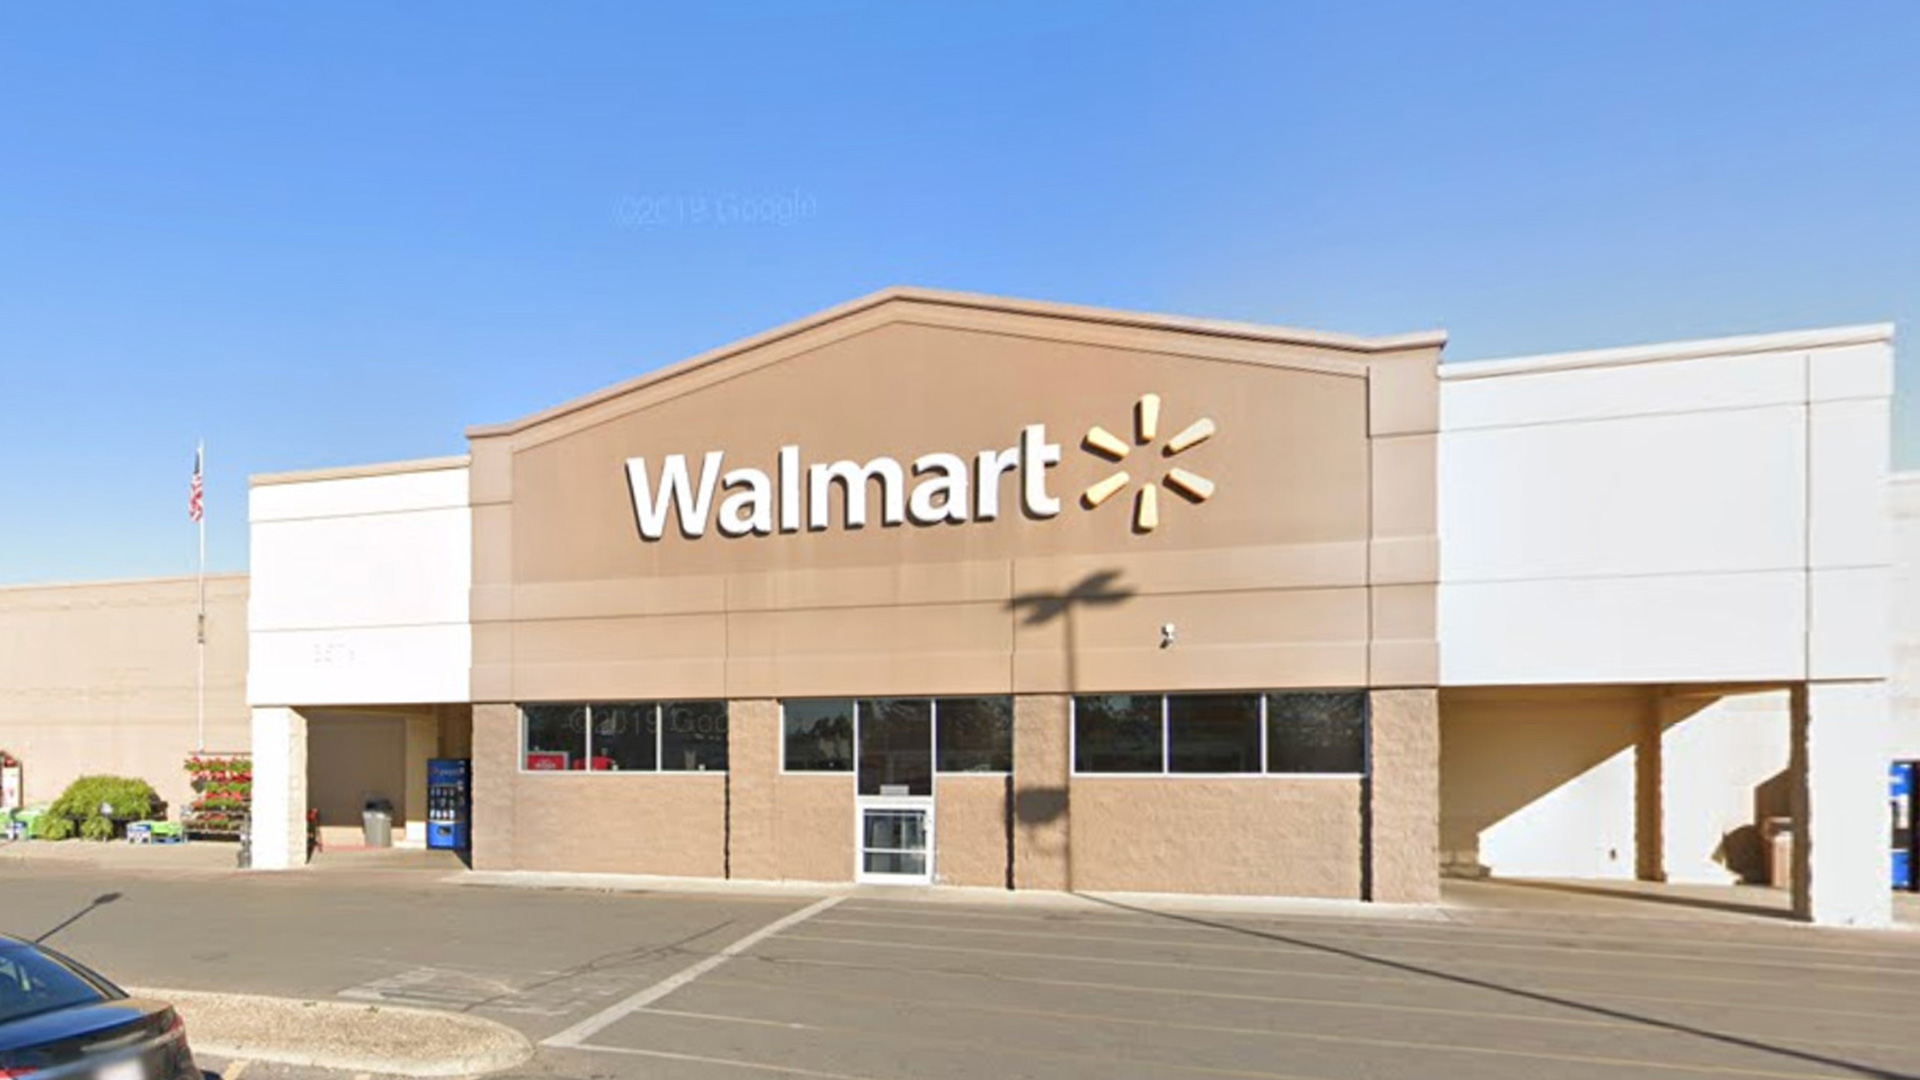 Walmart store forced to close after ‘failing to meet financial expectations’ auctions off everything – even the shelves [Video]